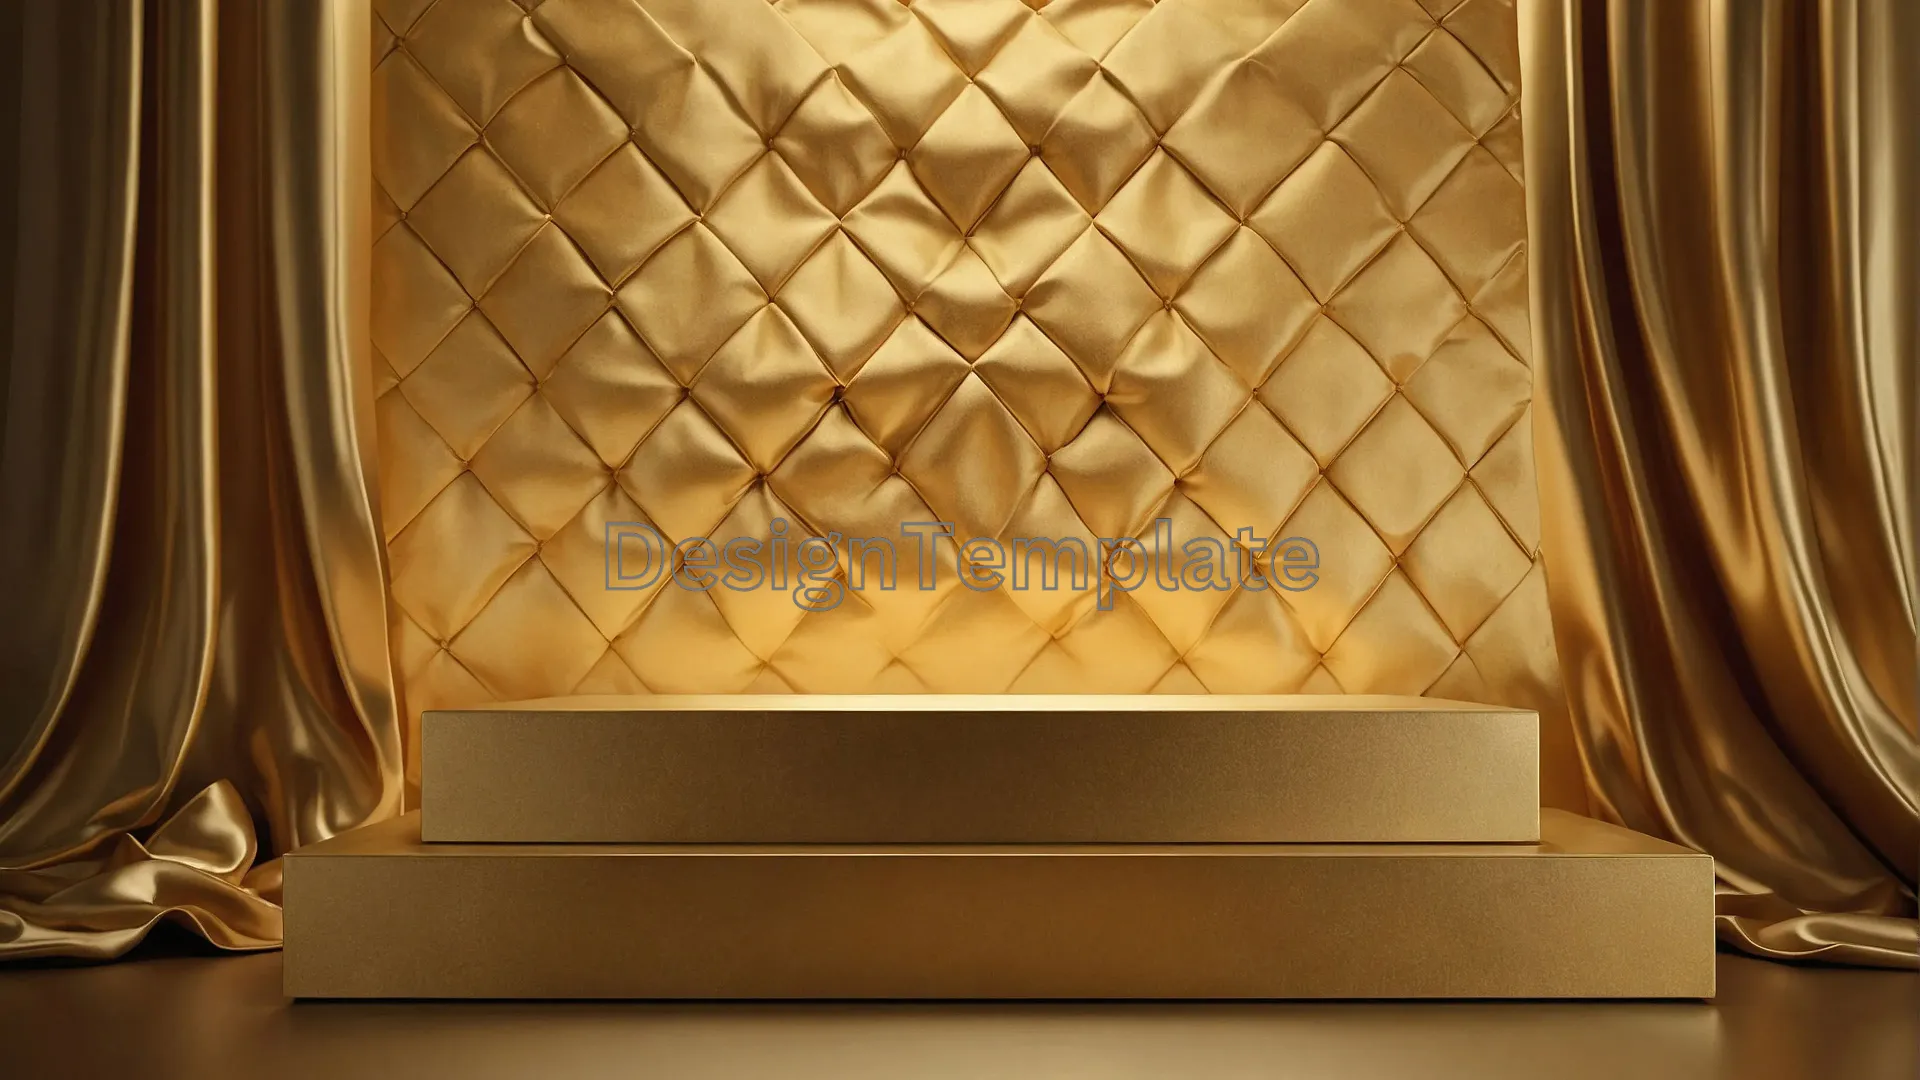 Luxurious Golden with Podium Curtains Photo image